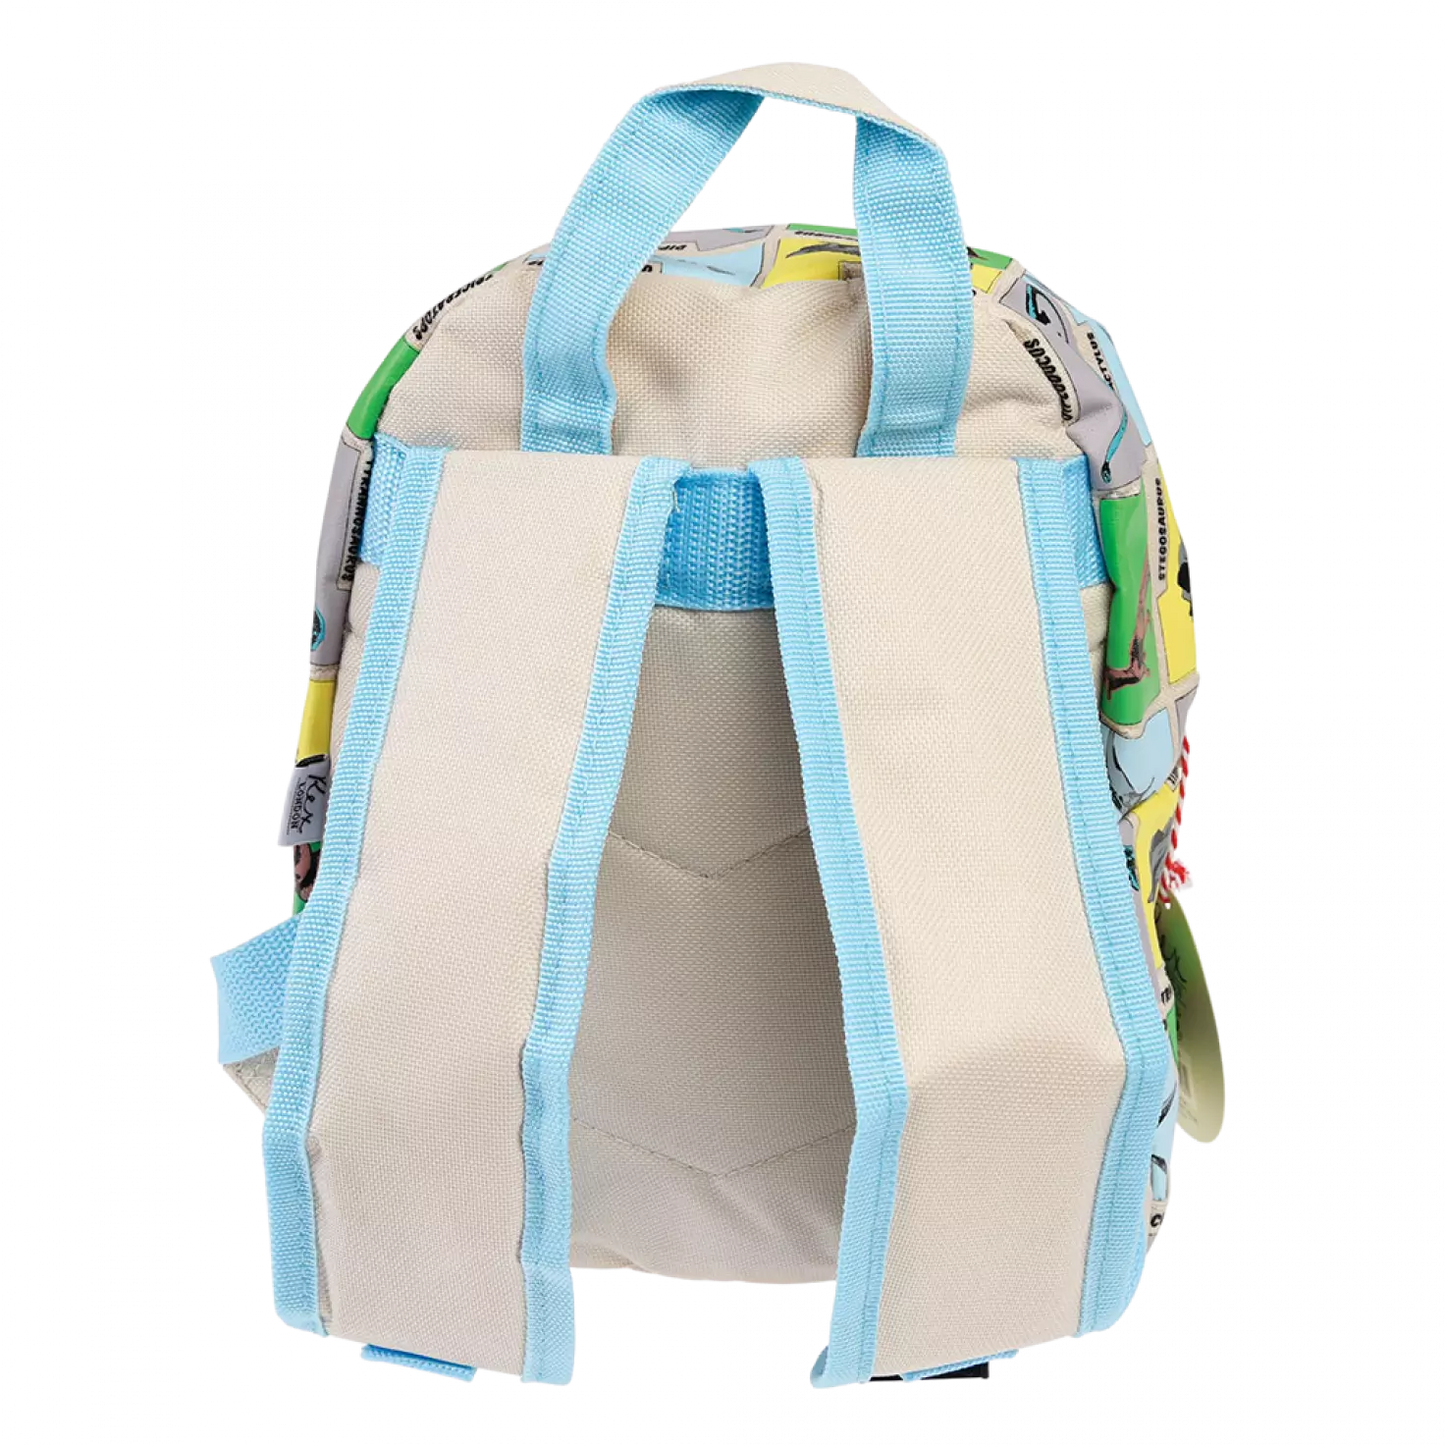 A childs backpack by Rex London, style Prehistoric Land, in blue, green and yellow multi dino print, two compartments with zip fastenings. Back view of padded straps.